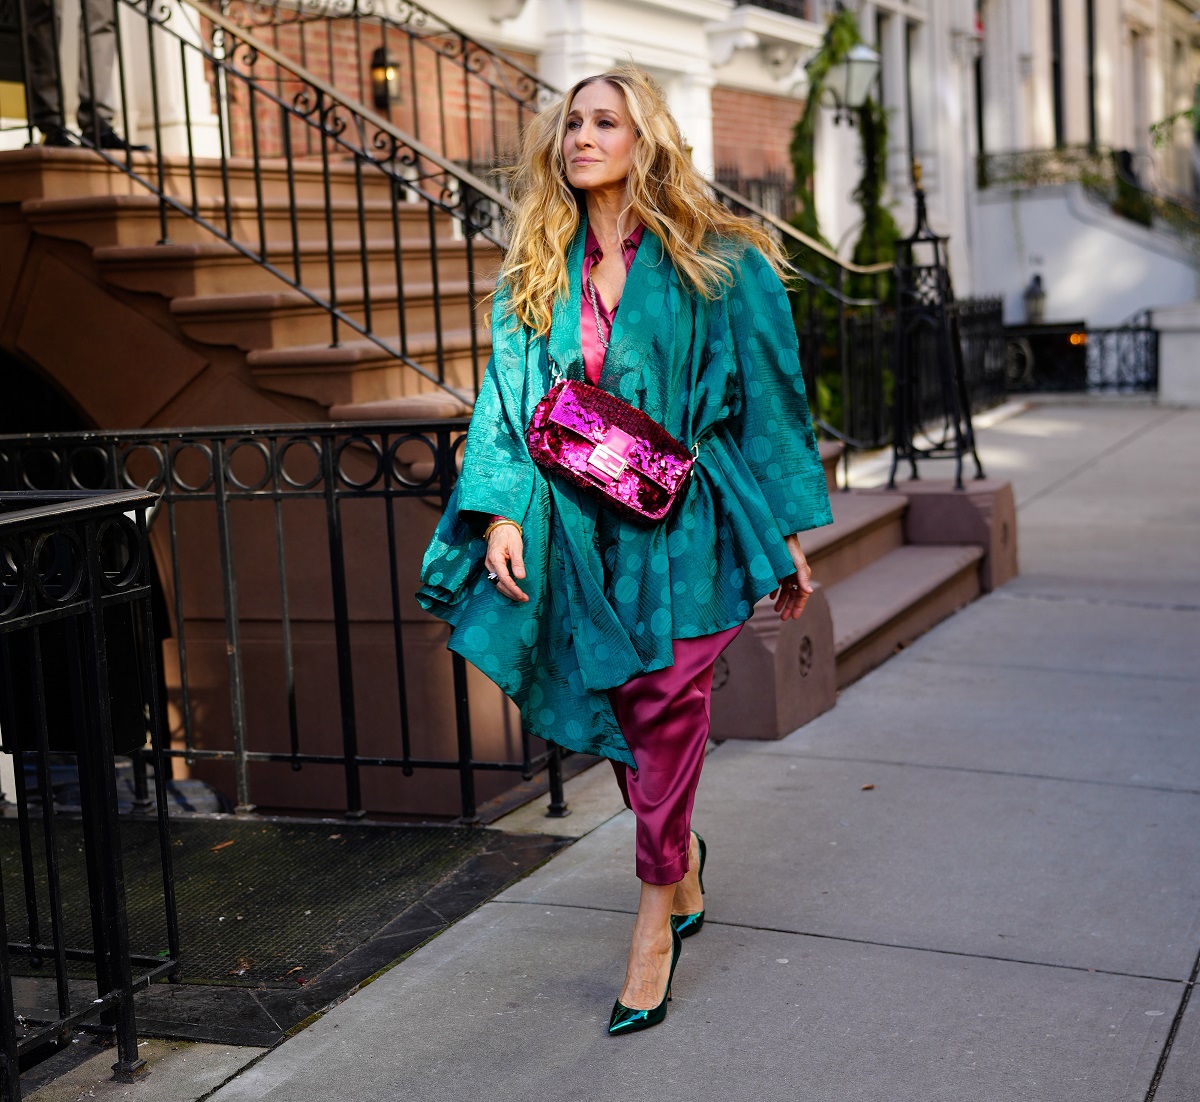 Sarah Jessica Parker as Carrie Bradshaw walks down a New York City street wearing magenta pants and a emerald green top during the filming of 'And Just Like That...' season 2